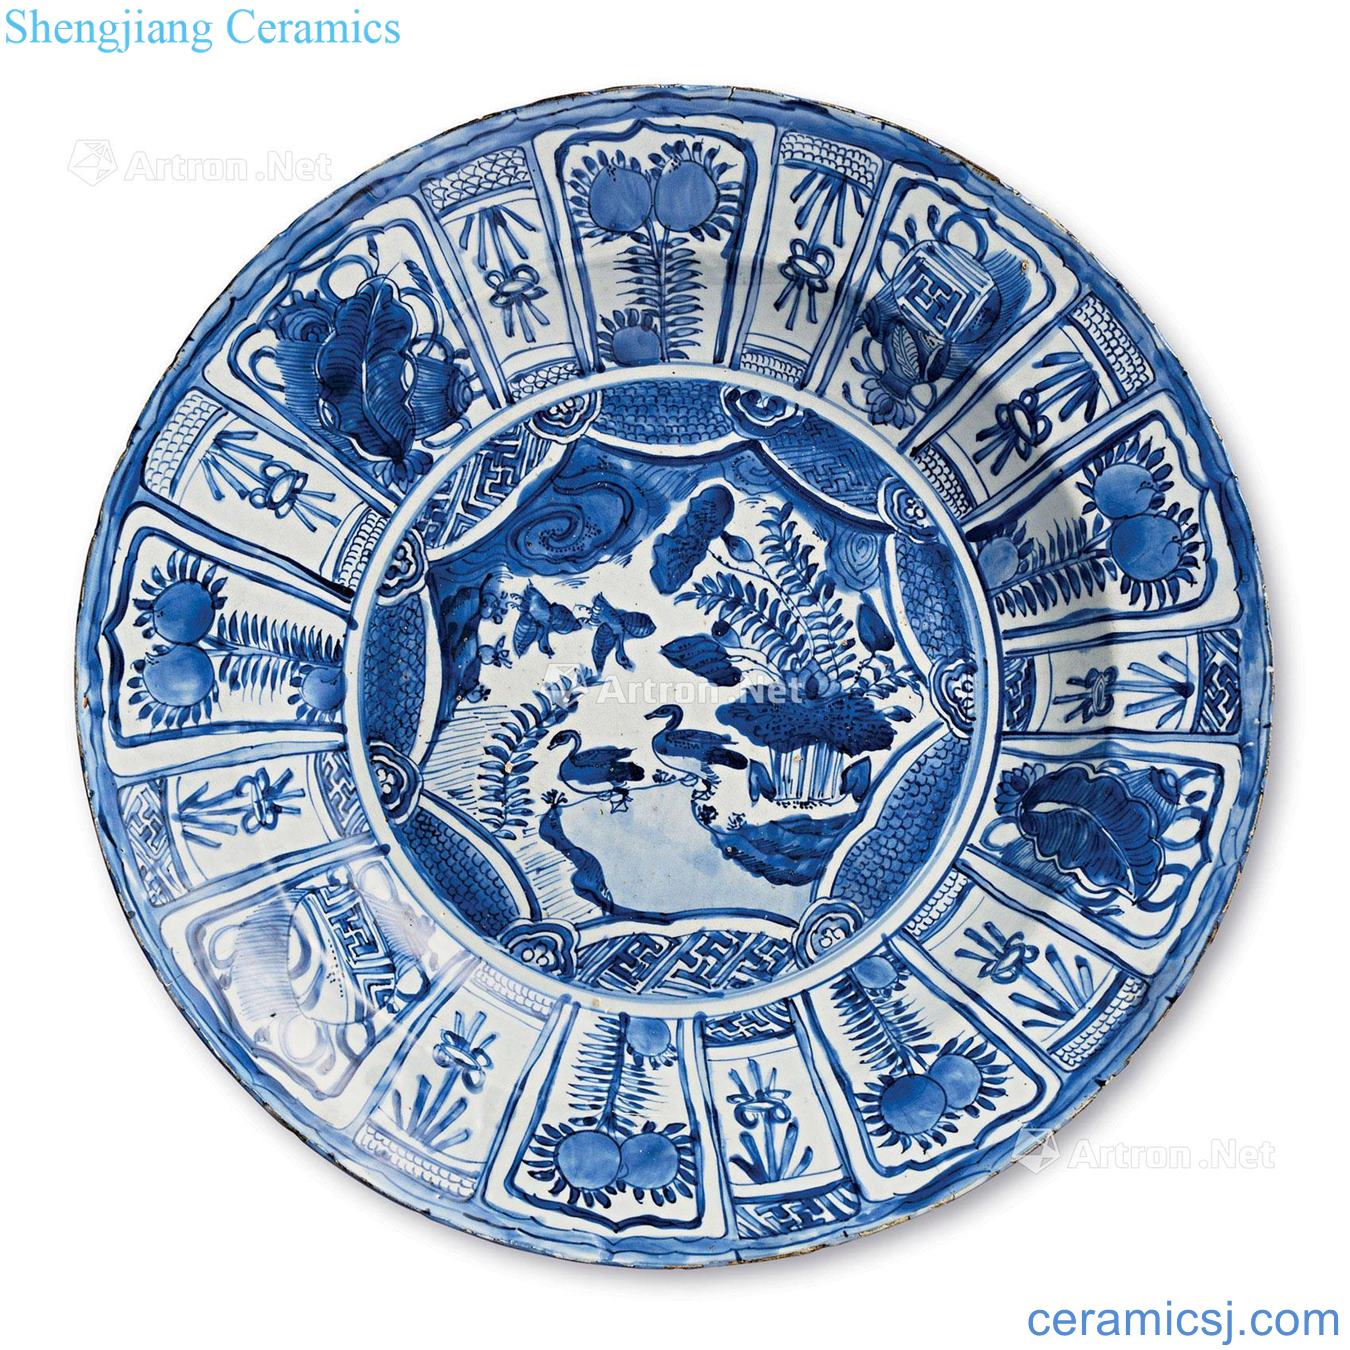 China, the Ming dynasty Clark, blue and white flower on the grain market